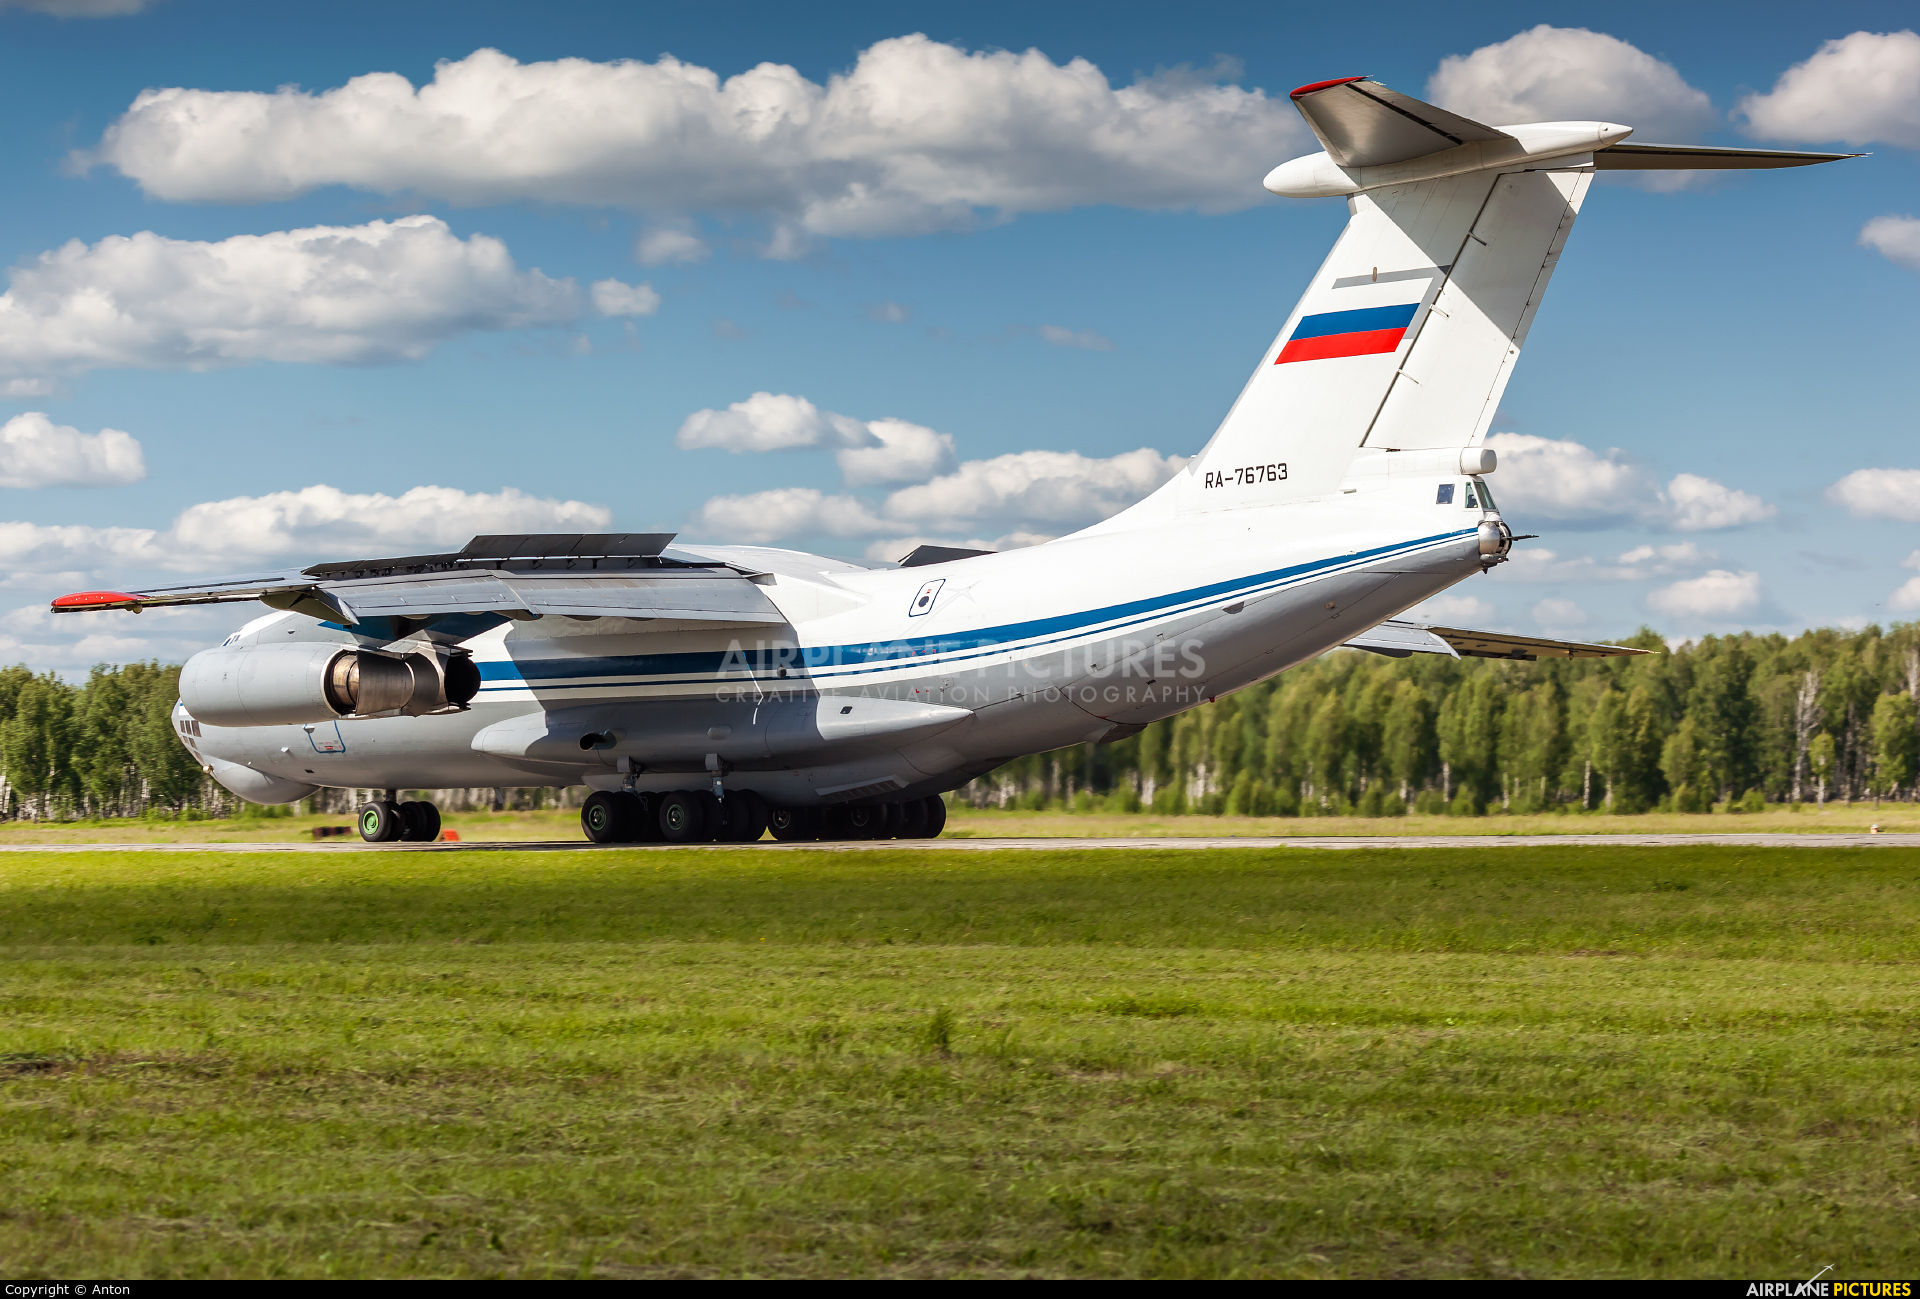 Russia - Air Force RA-76763 aircraft at Undisclosed Location